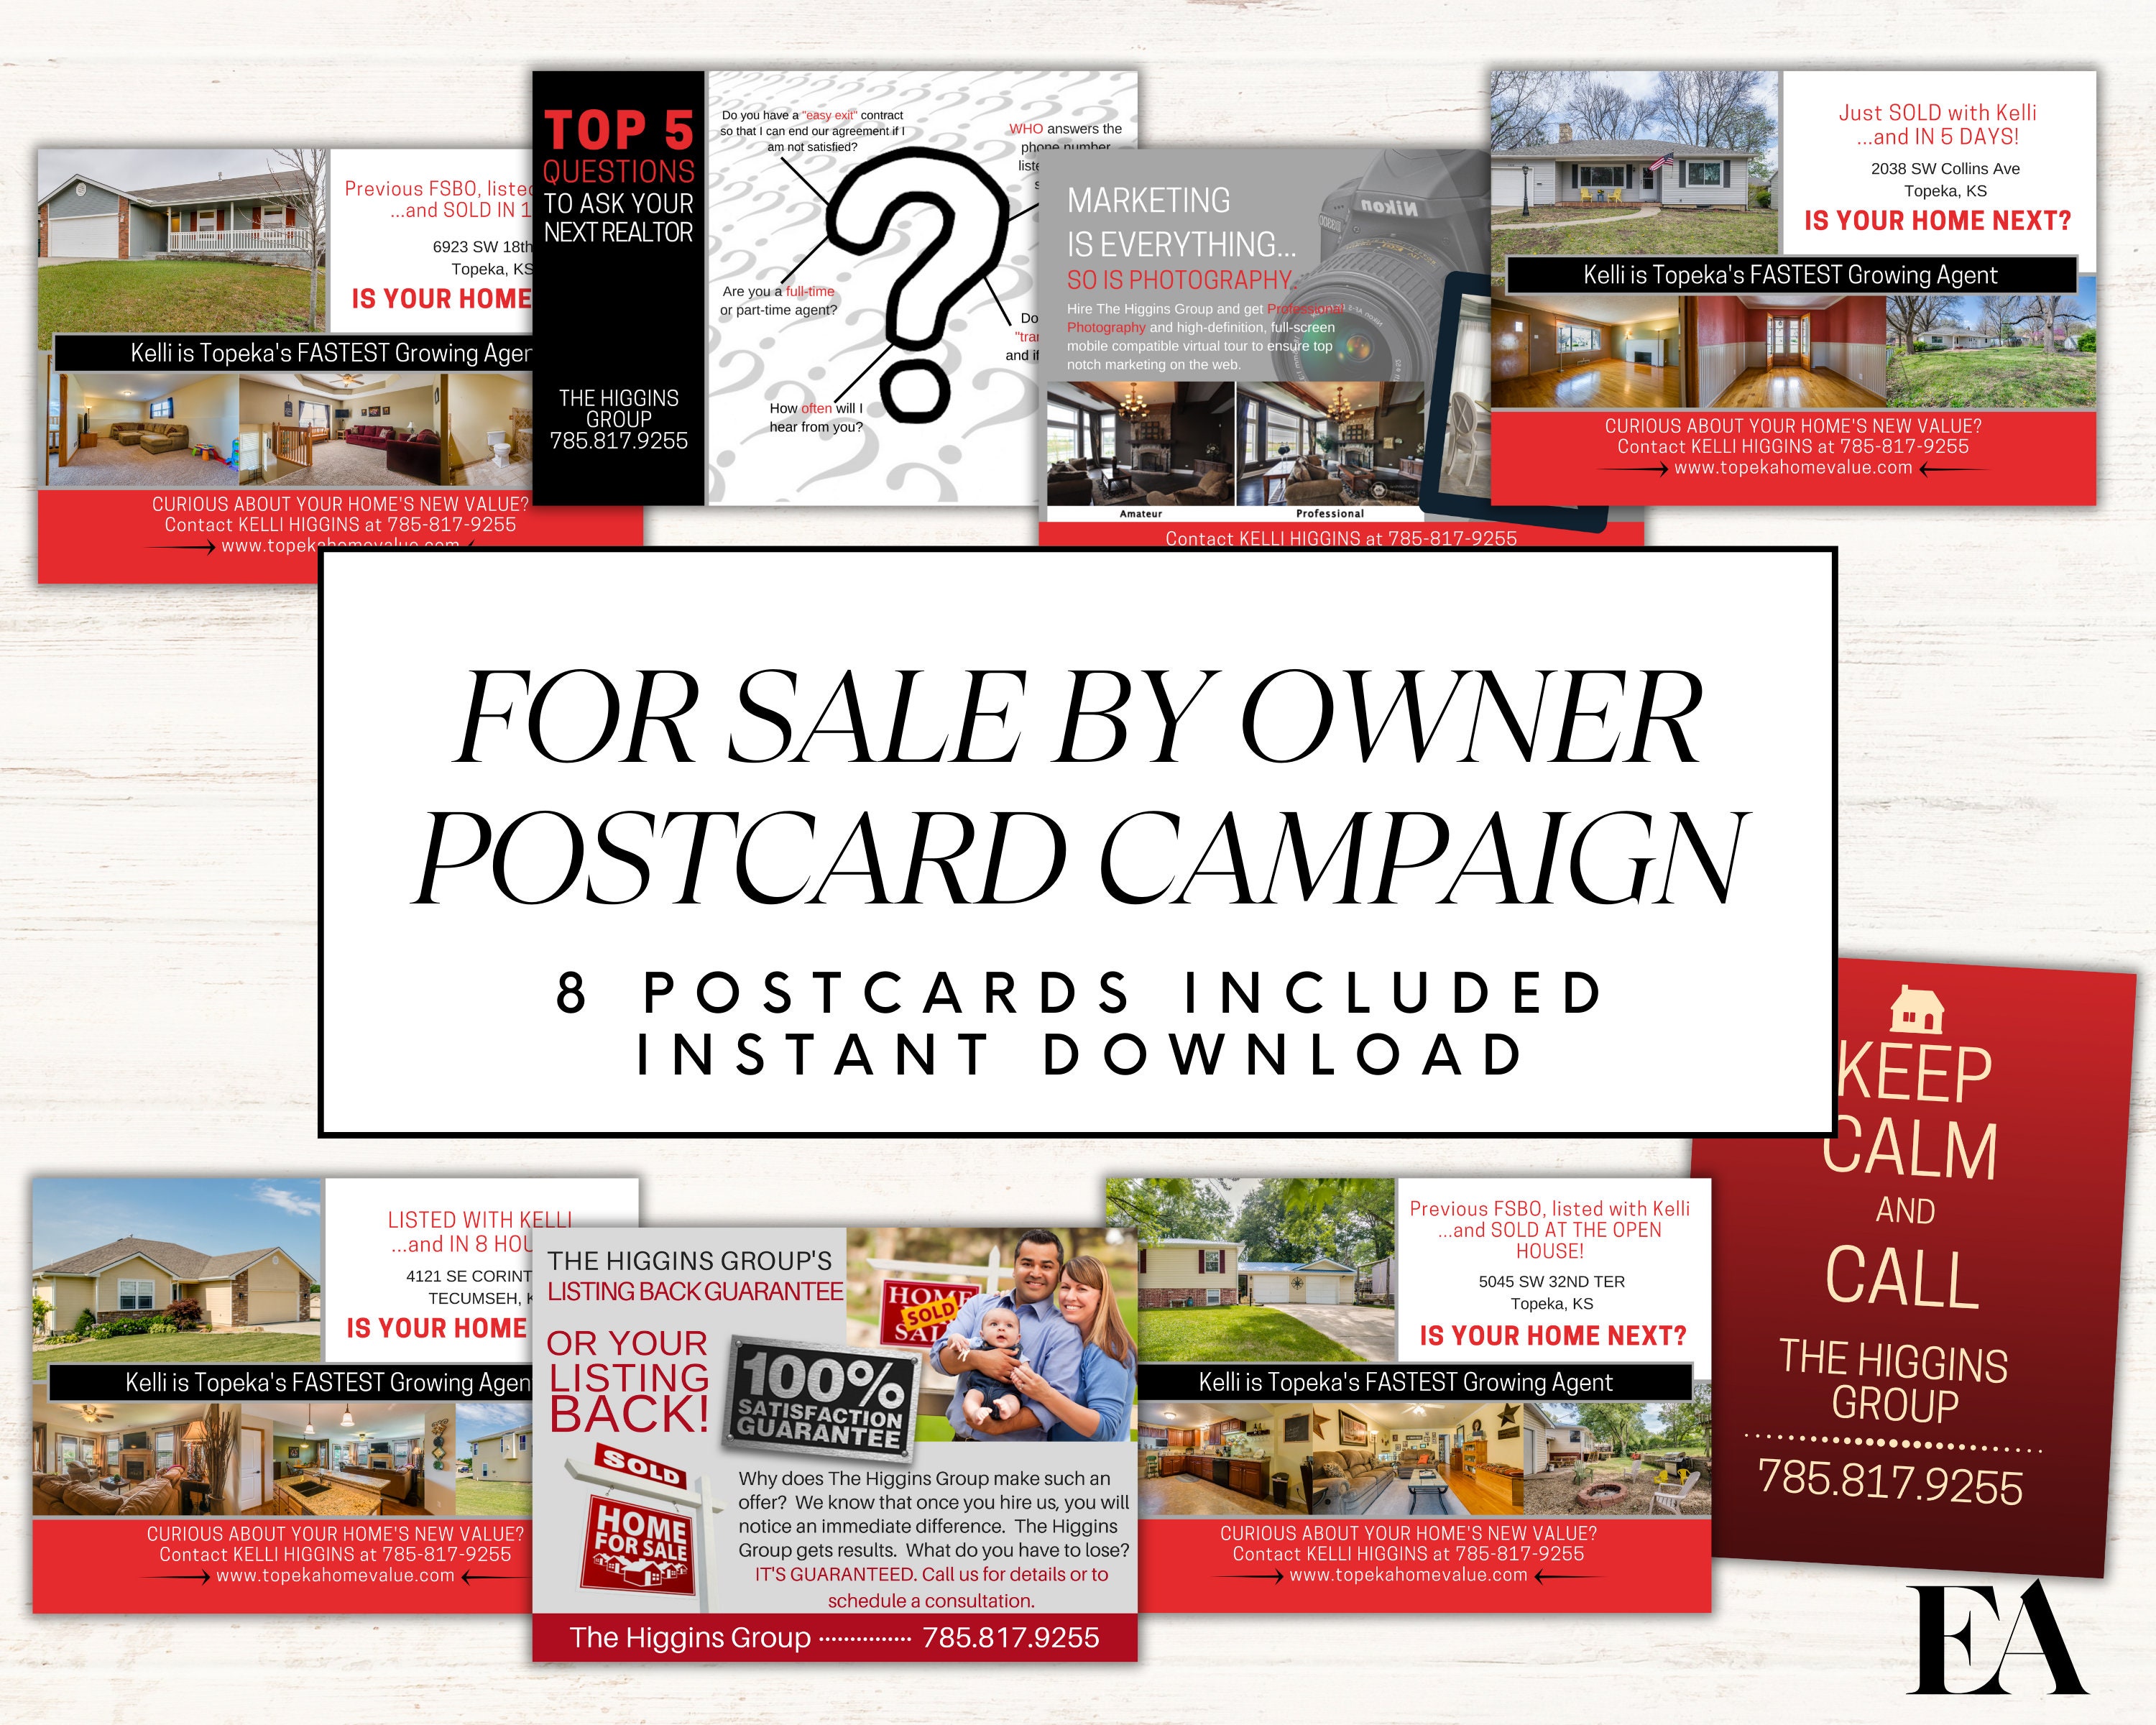 Real Estate FSBO Postcard for Sale by Owner Guide Real Estate pic